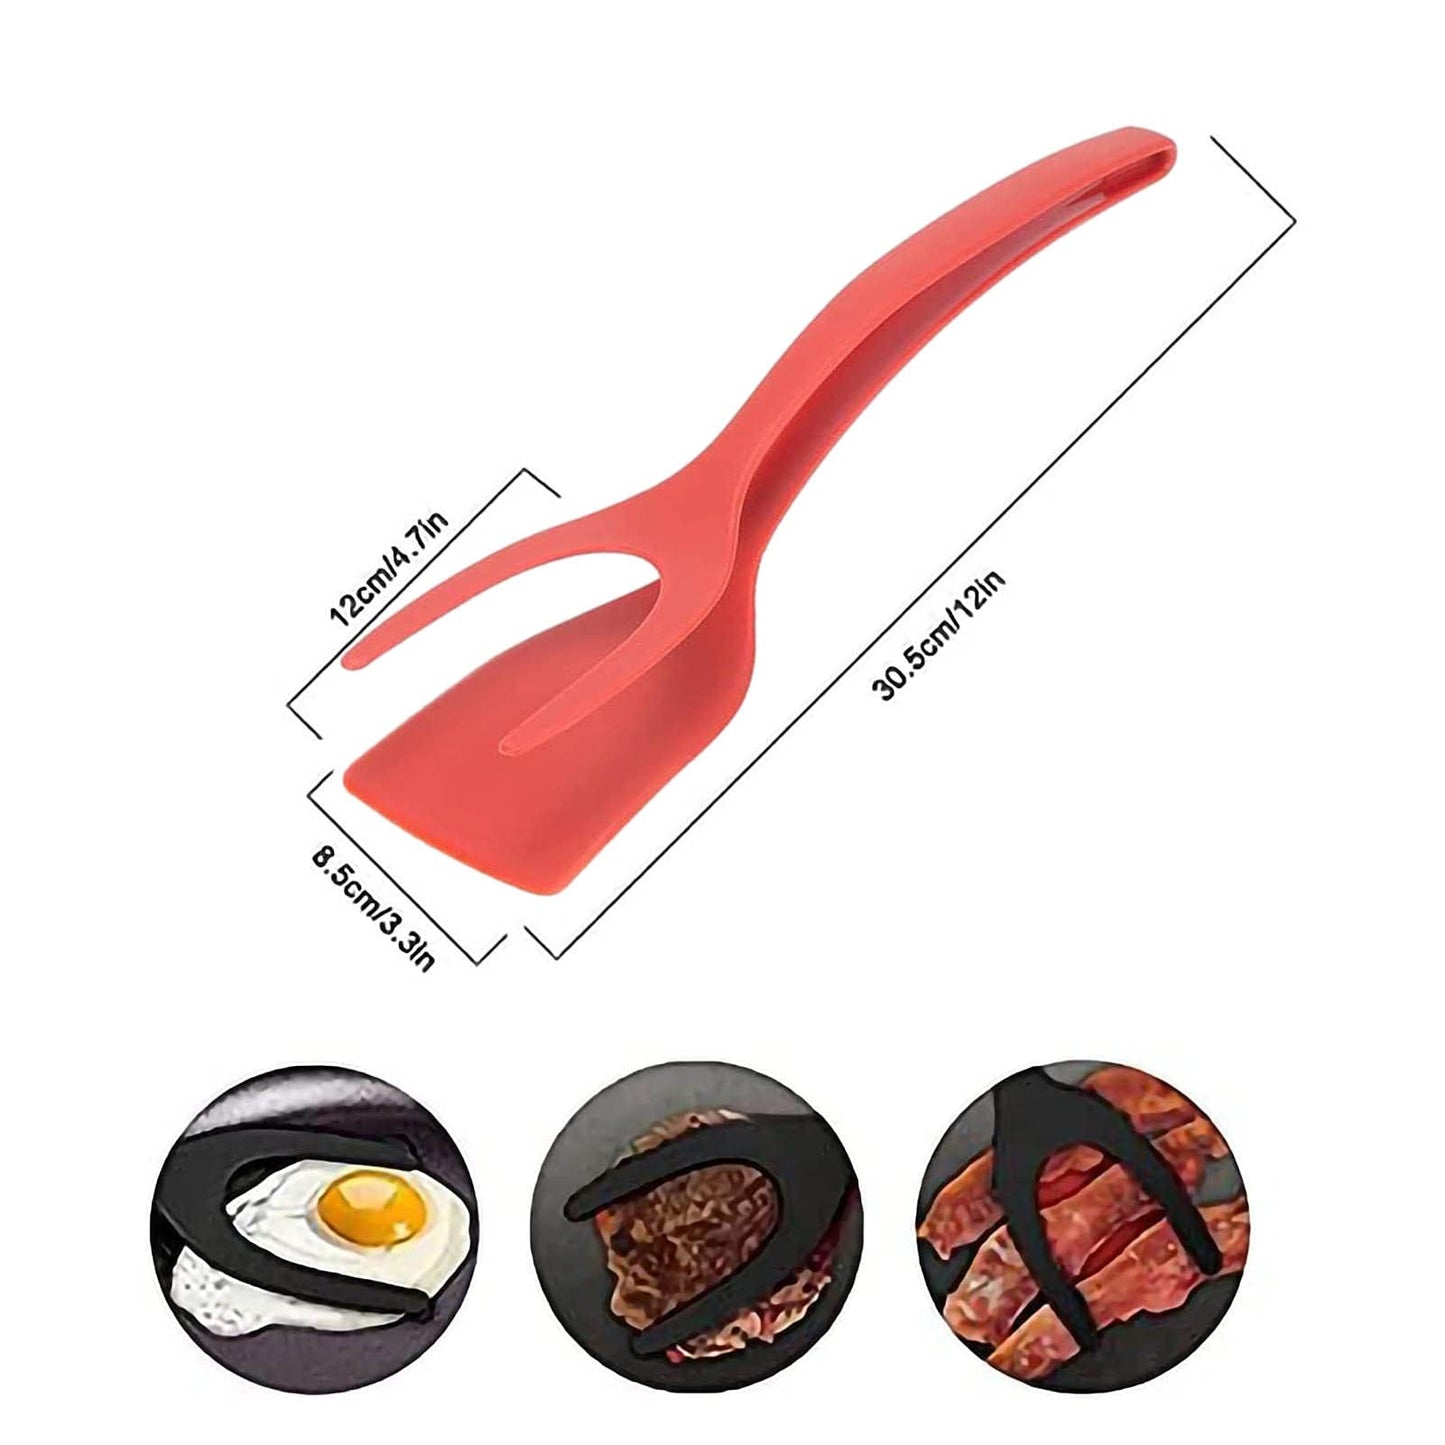 Egg Spatula, Grip and Flipp Tongs Spatula, Fried Eggs Turners, 2 in 1 Omelette Clamp, Frying Turning Grilling Kitchen Cooking Tool for Omelette, Pancake, Steak, Fish, and Egg Ziurmut